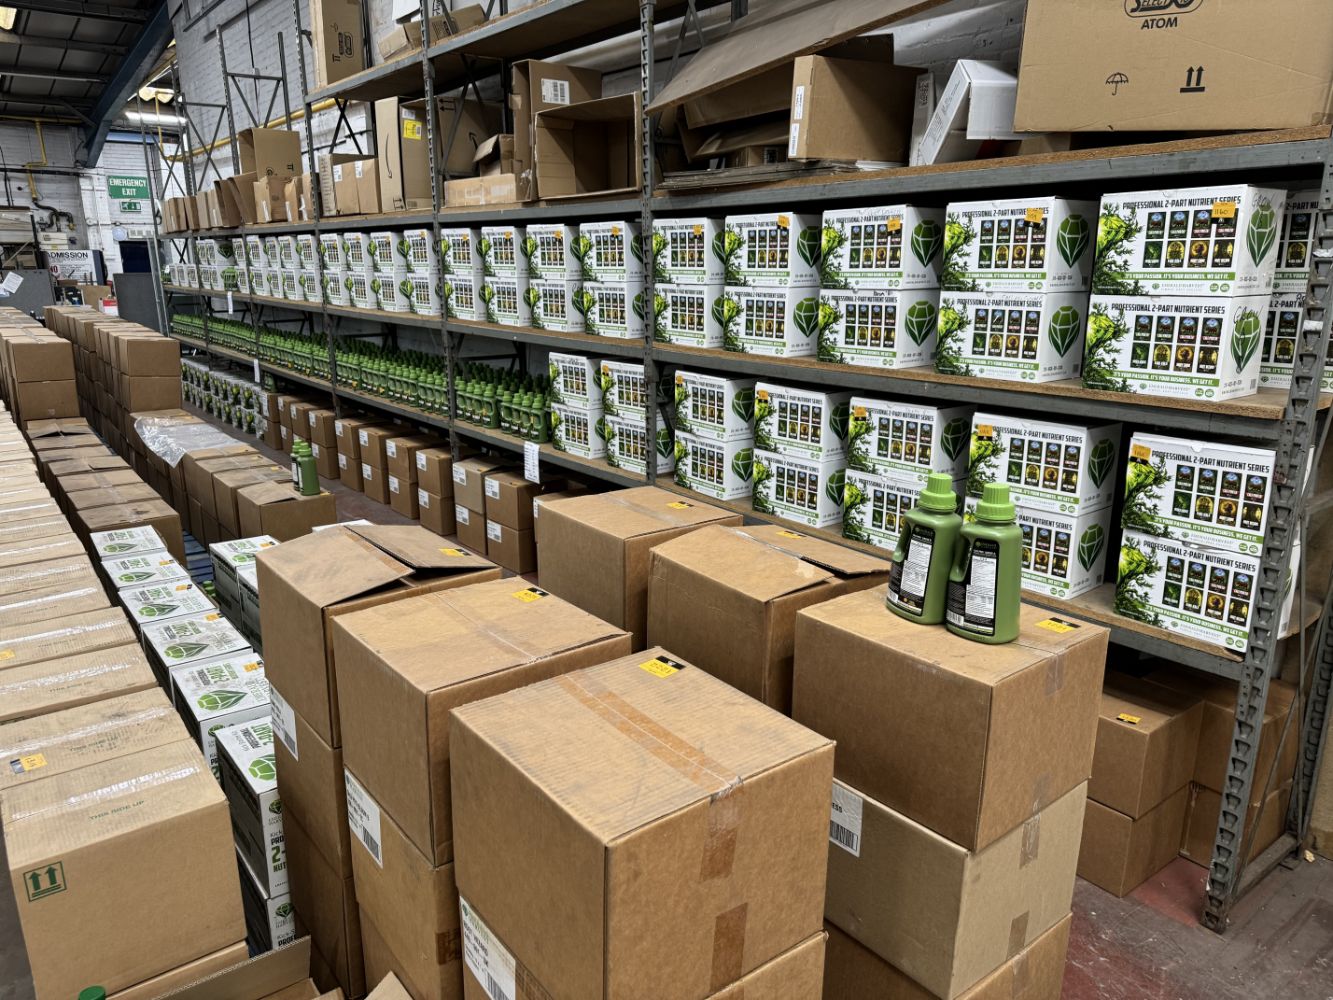 Total Stock from a Hydroponics Distributor in liquidation: 100s of pallets of nutrients, soil, timers & more. Also General Horticulture & Vans